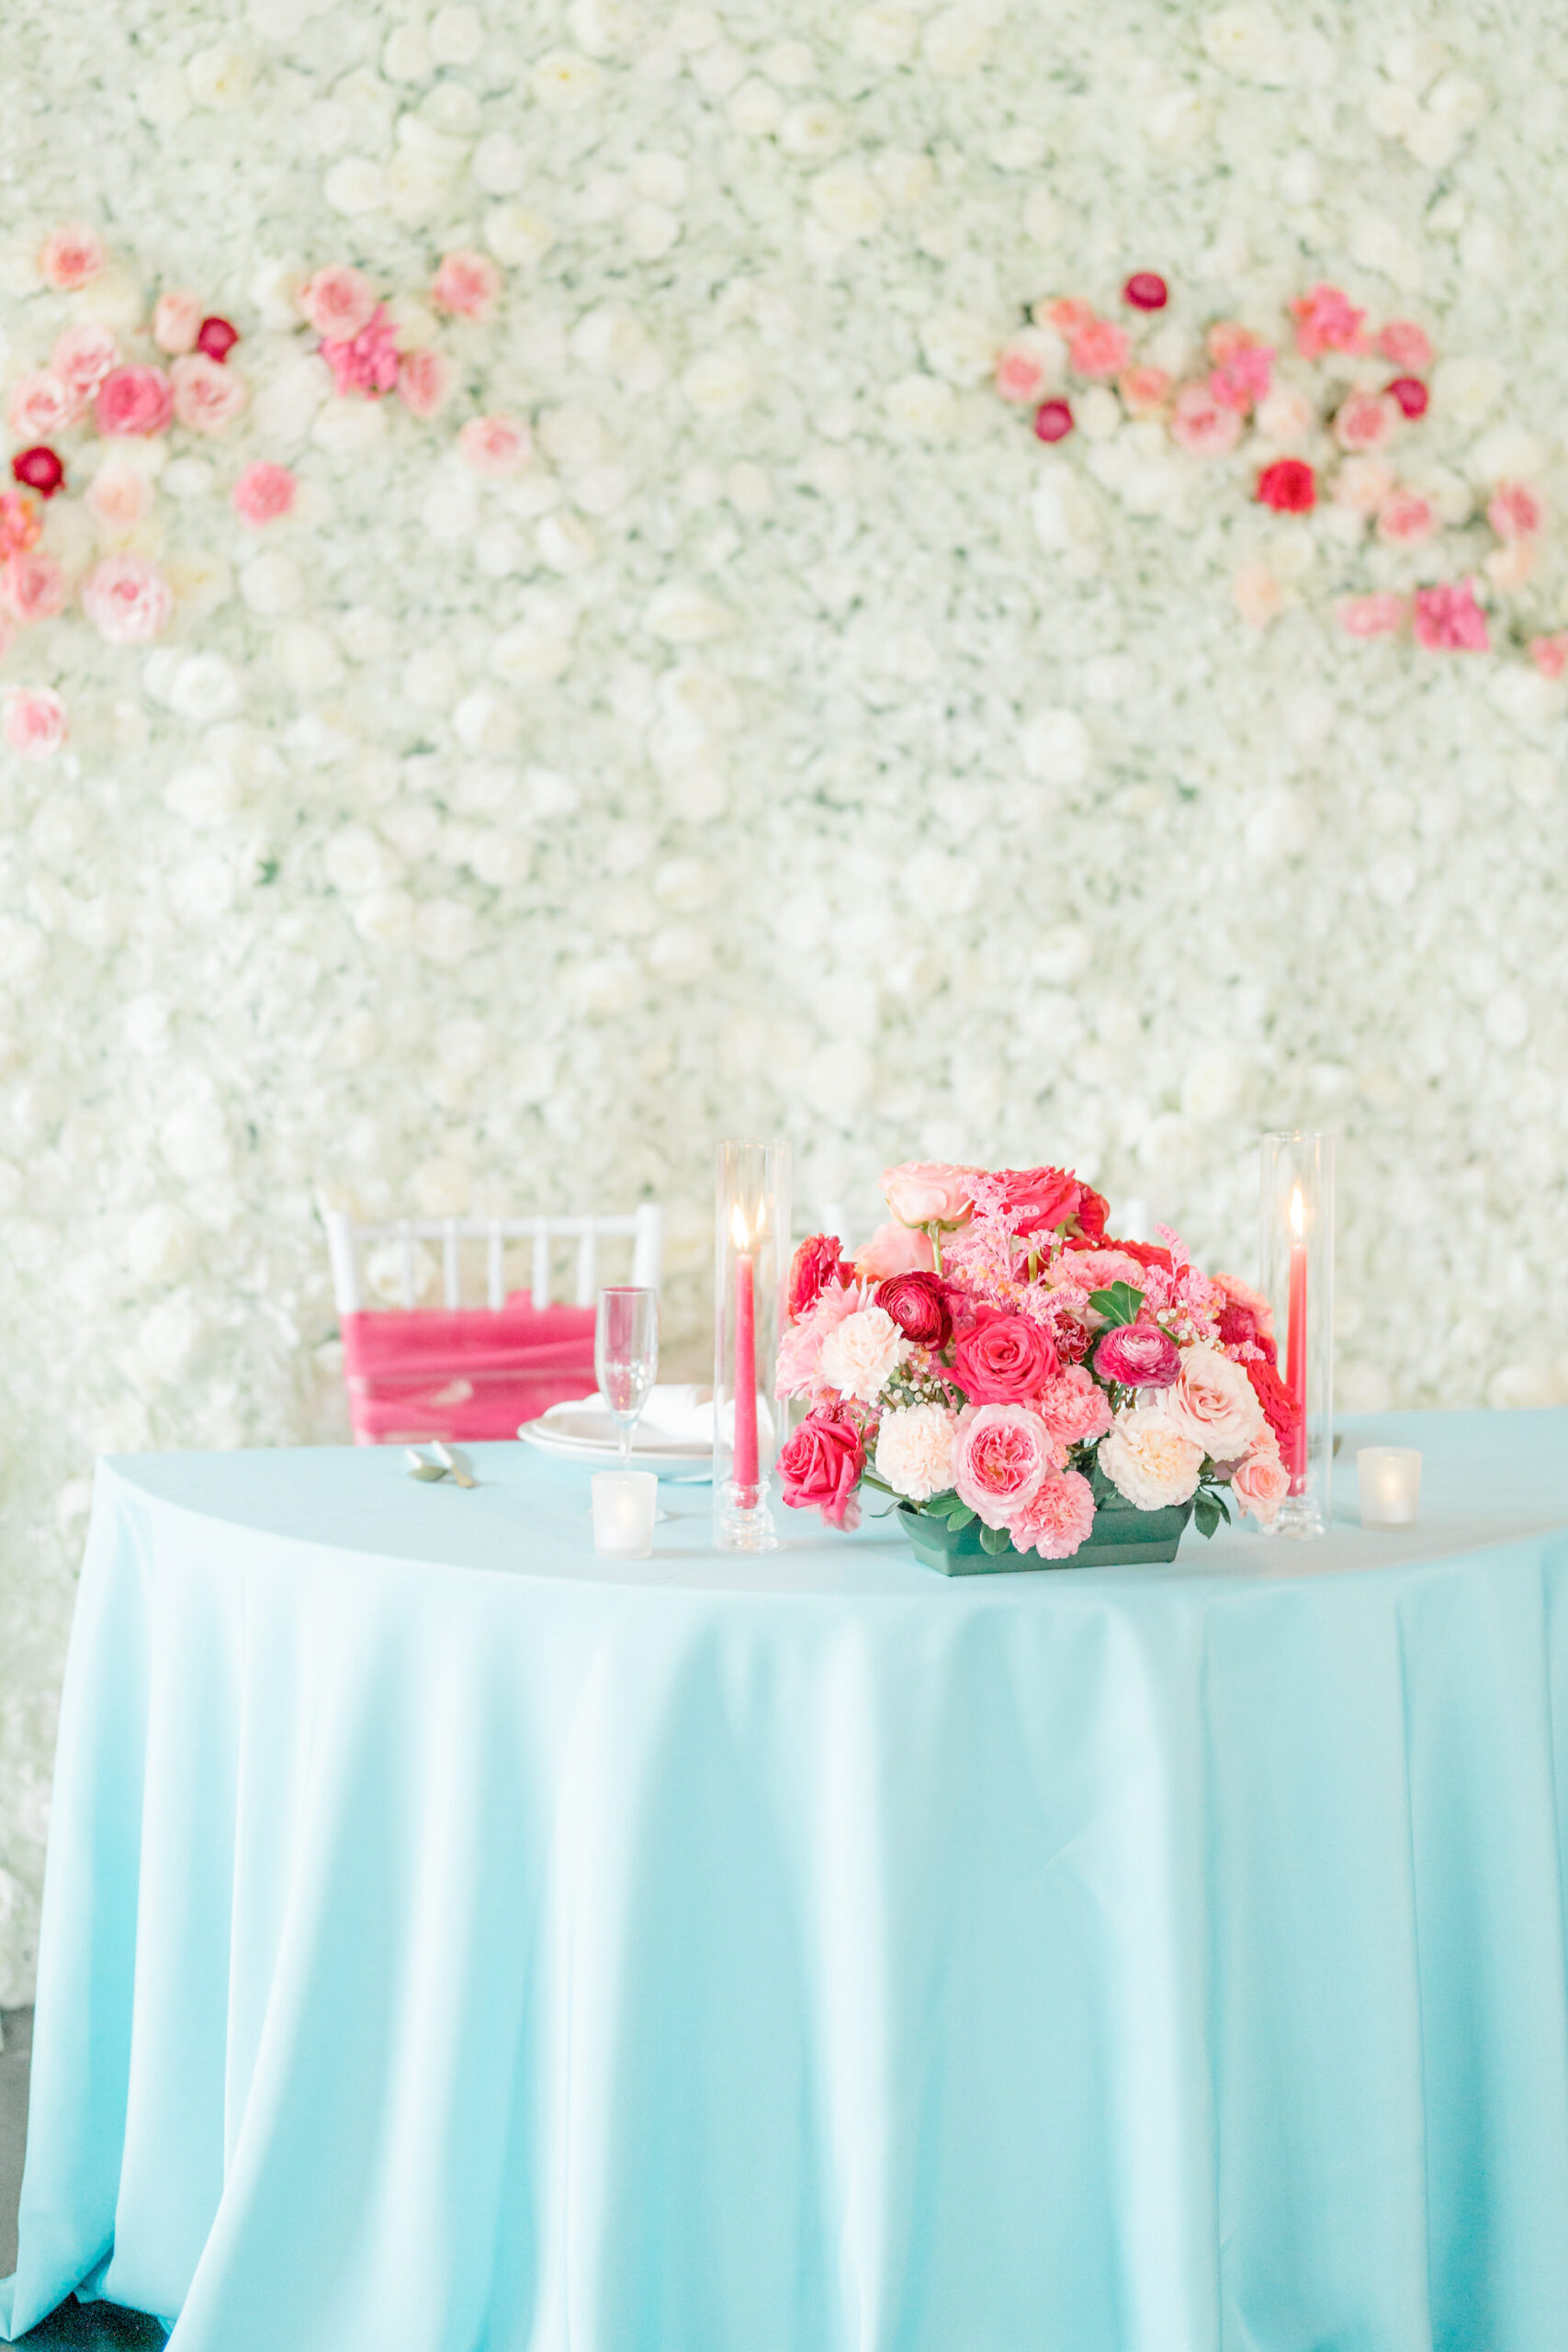 Whimsical Summer Inspired Wedding Decor, White Floral Wall Backdrop, Sweetheart Table with Turquoise Linen, Pink Candlesticks, Peach, Fuchsia Roses Floral Bouquet | Tampa Bay Wedding Rentals Gabro Event Services